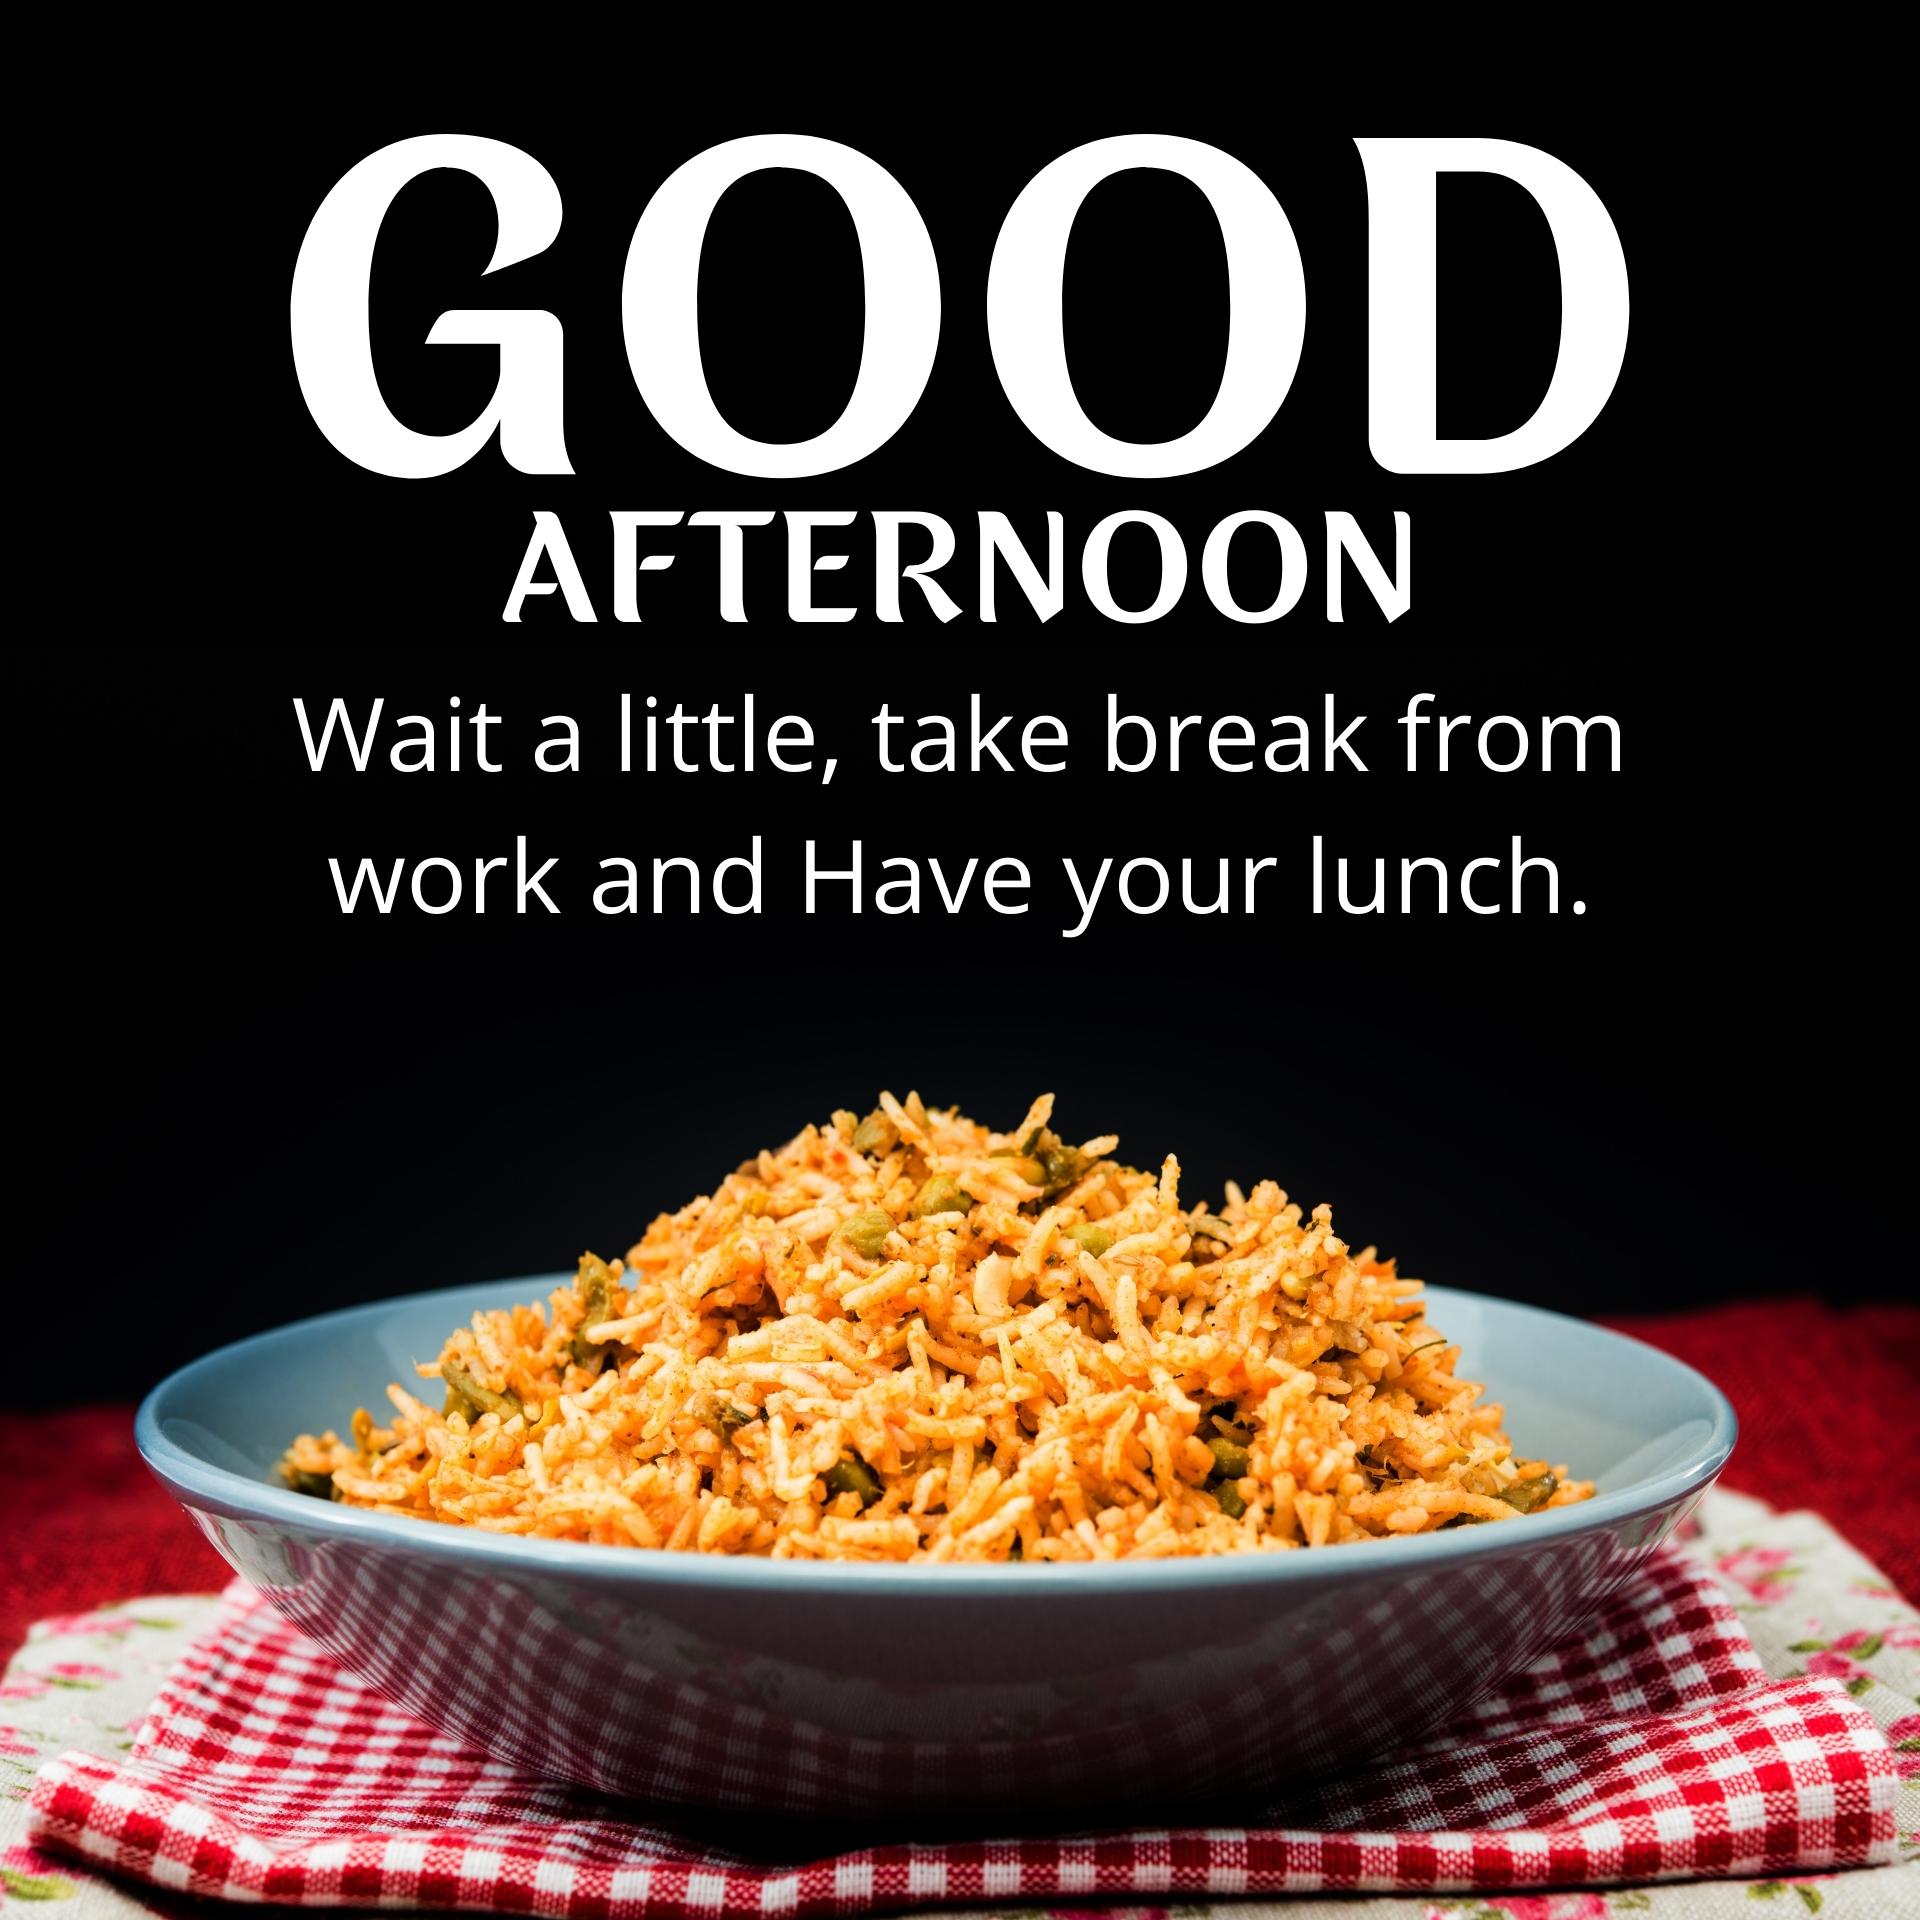 Good Afternoon Images With Lunch Biryani